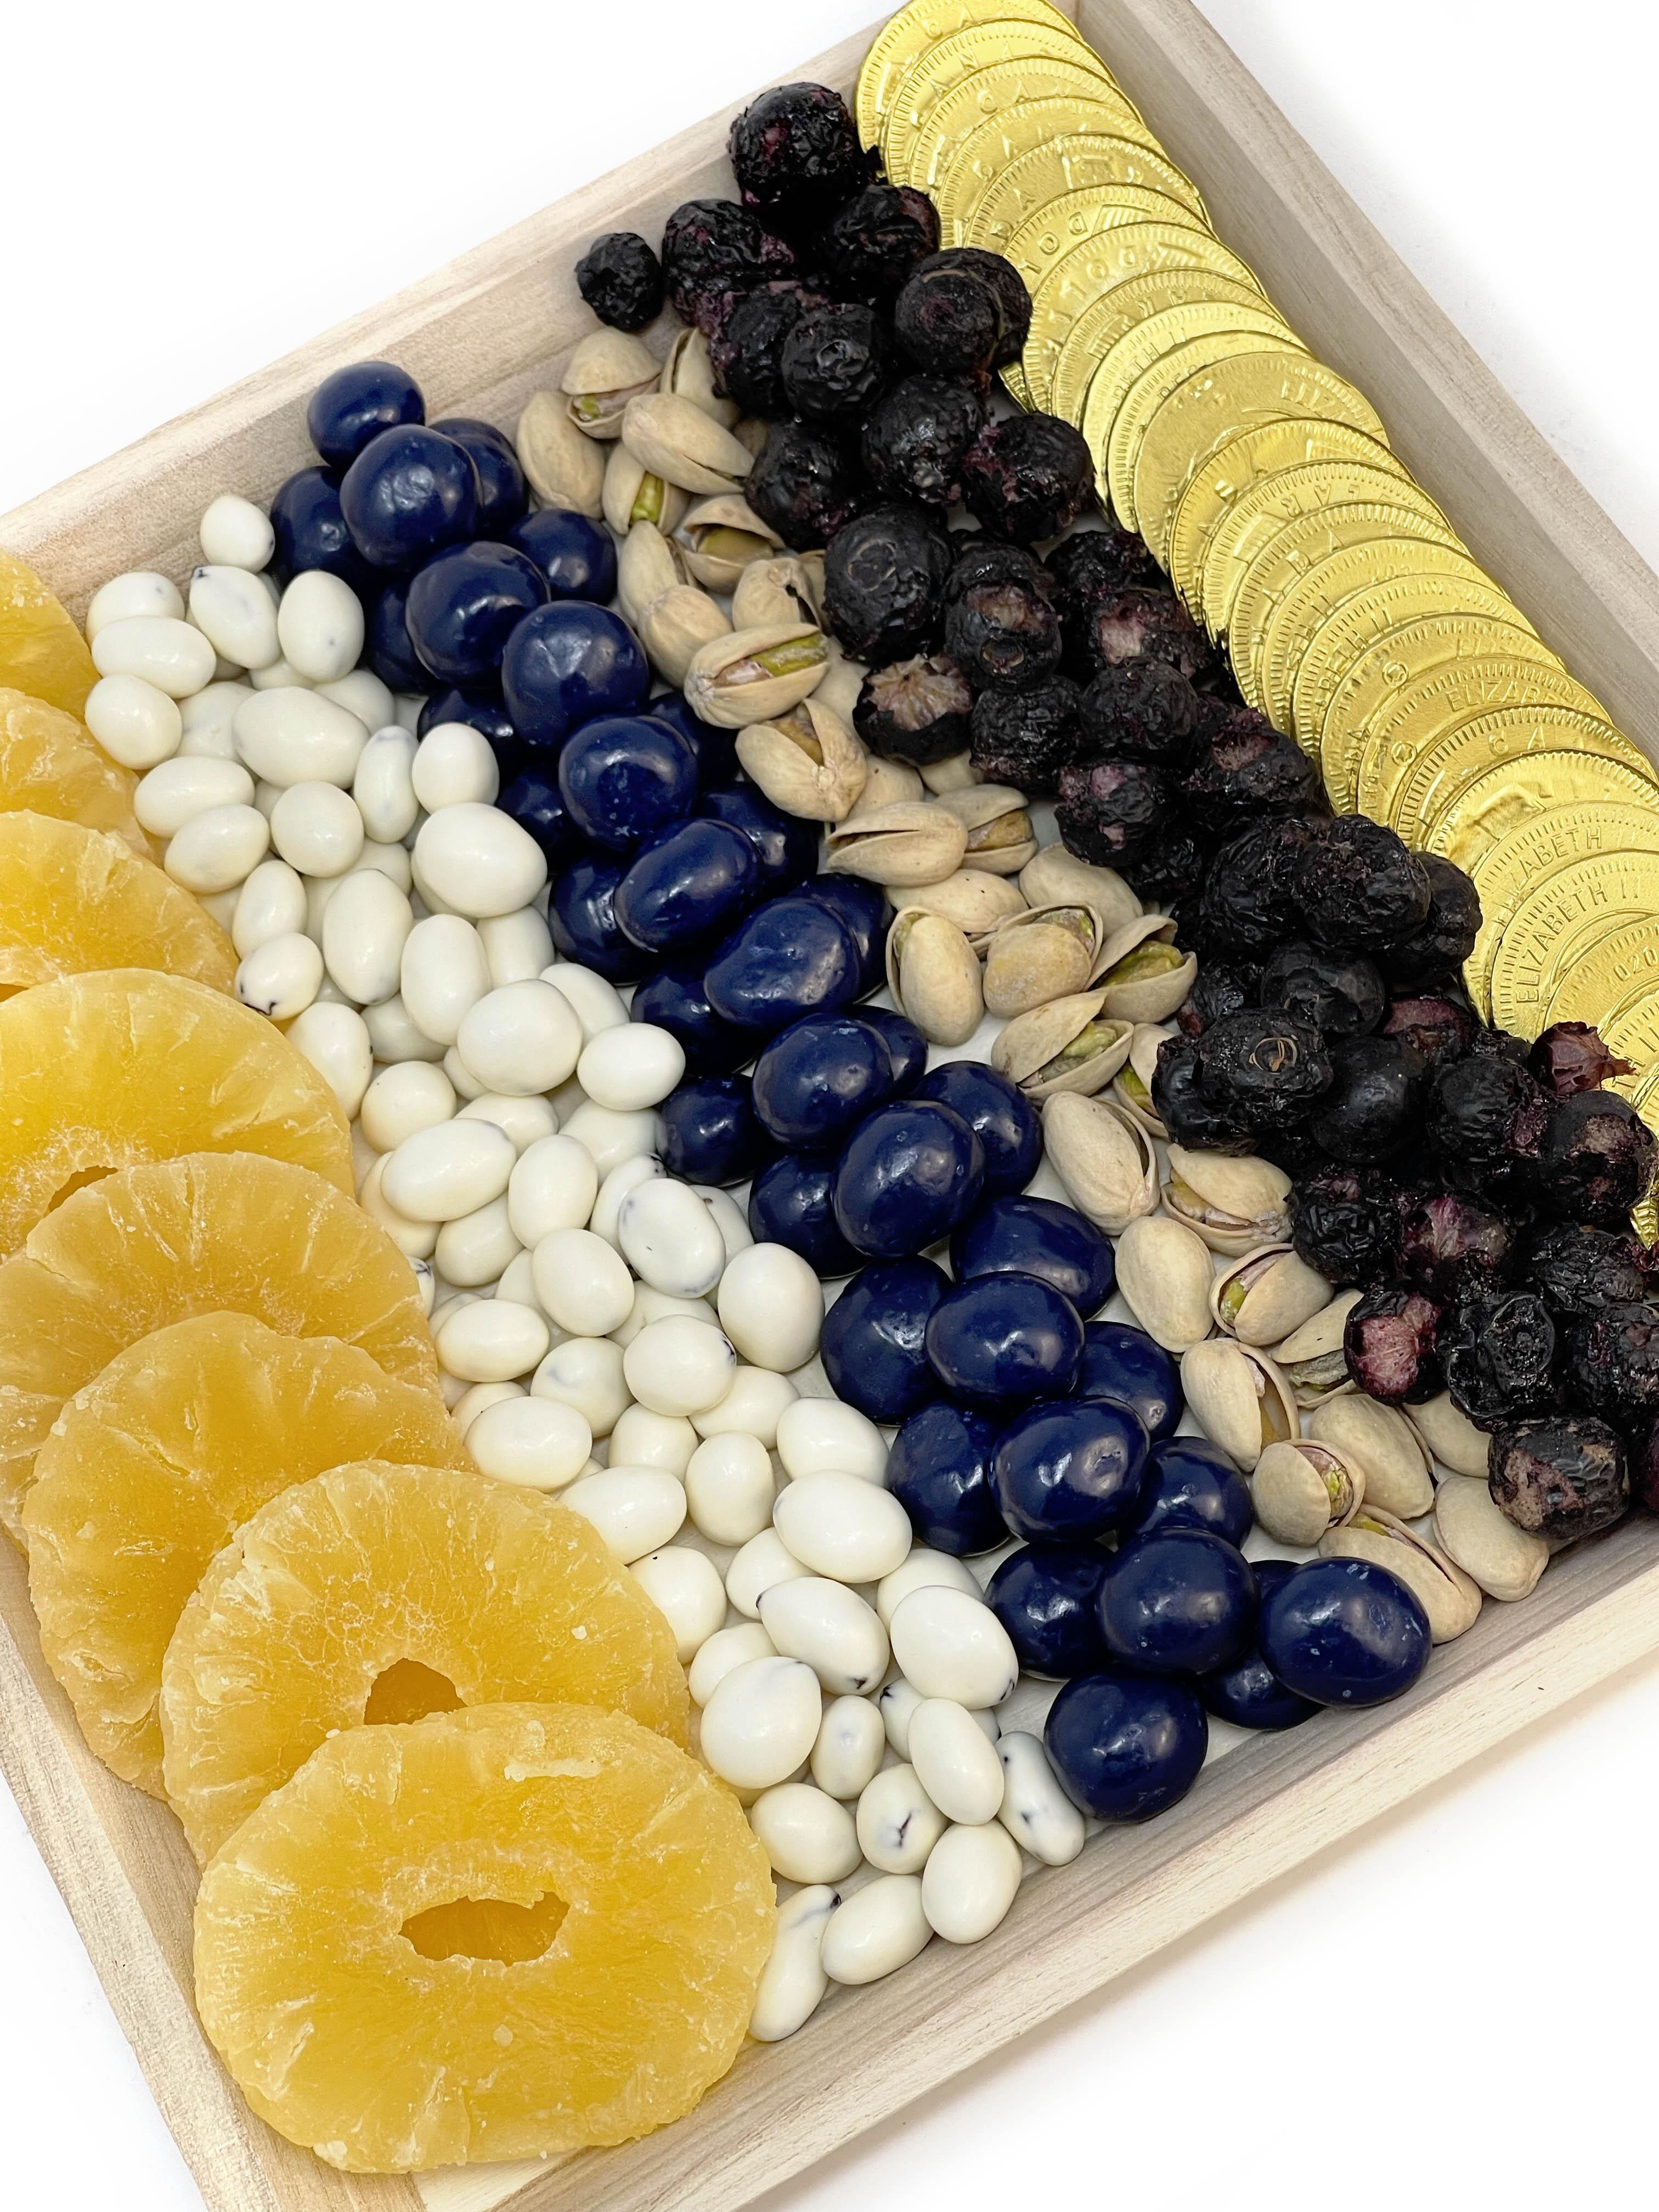 Hanukkah Dried Fruit and Nut Tray-Charcuterie-Corporate Catering Toronto-Best Charcuterie-Catering Toronto-Cured Catering